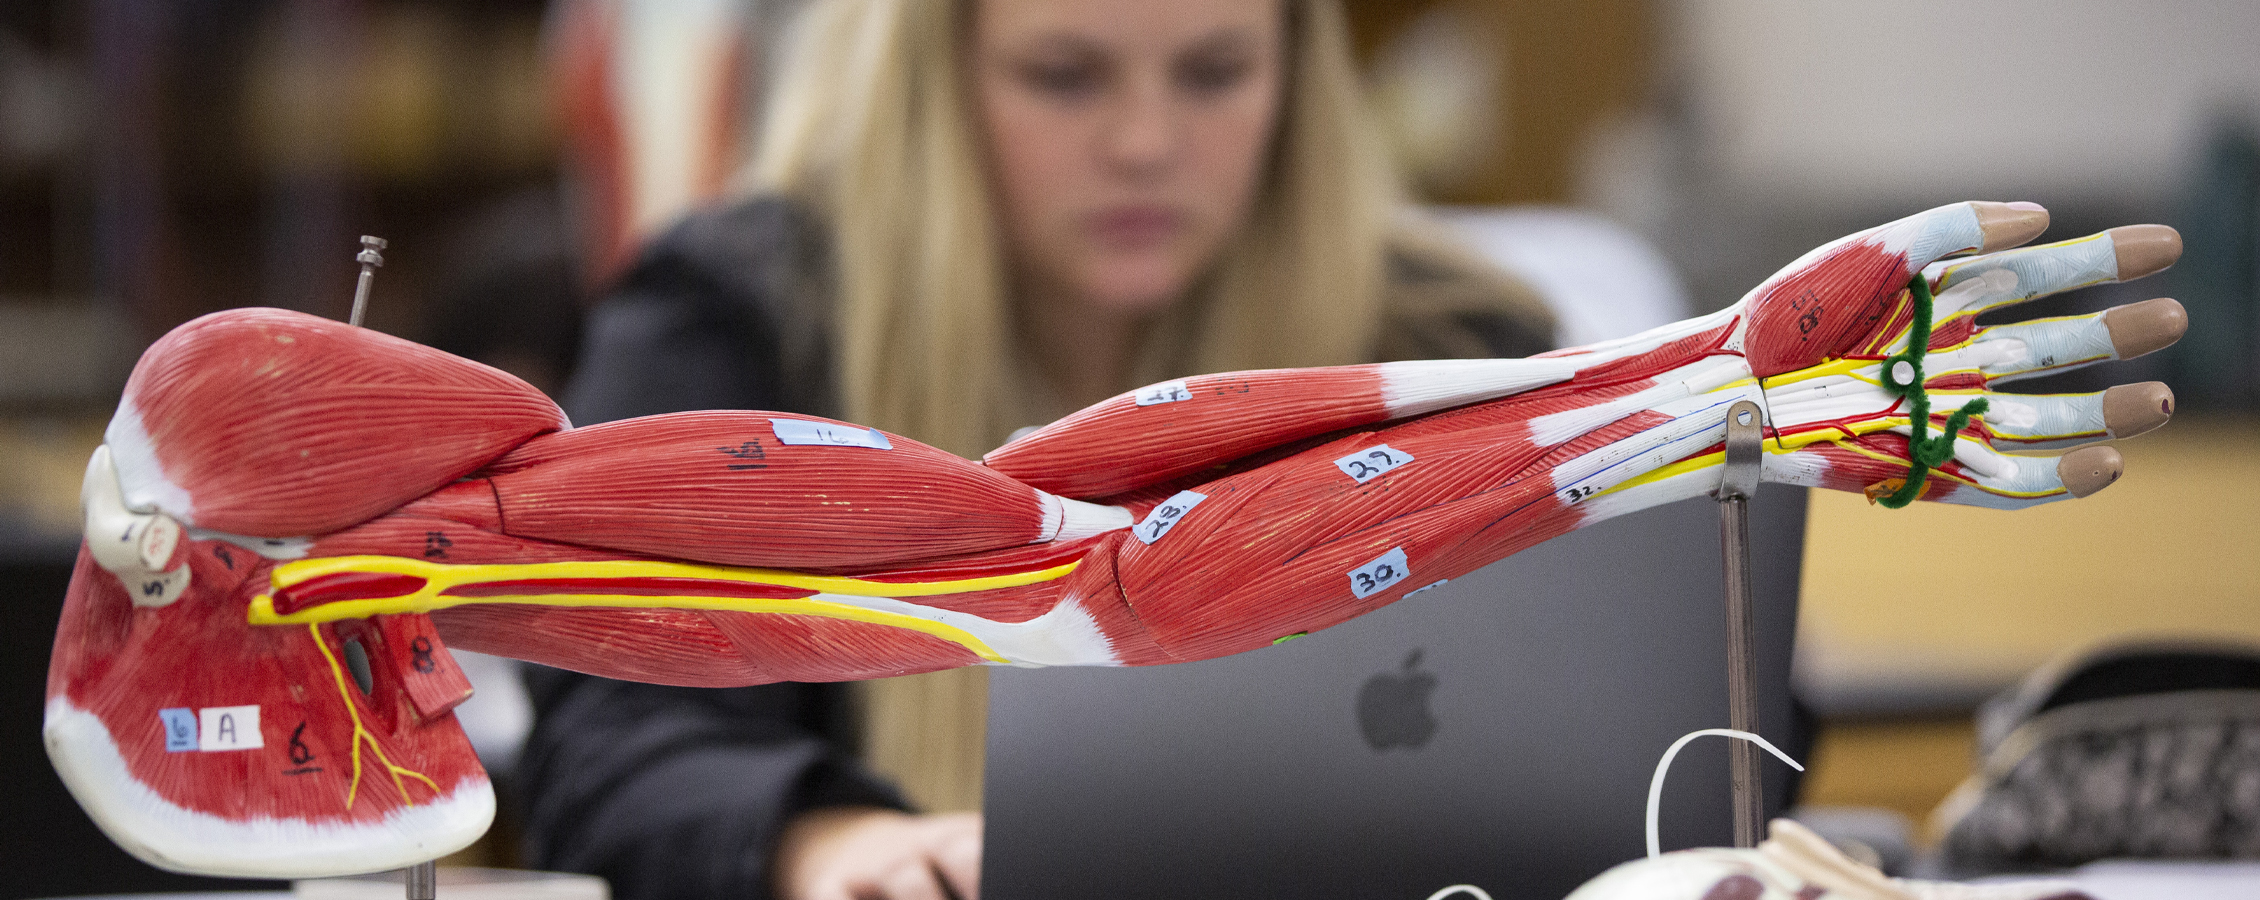 A 3-D model of an arm shows muscle fibers as a student studies in the background.